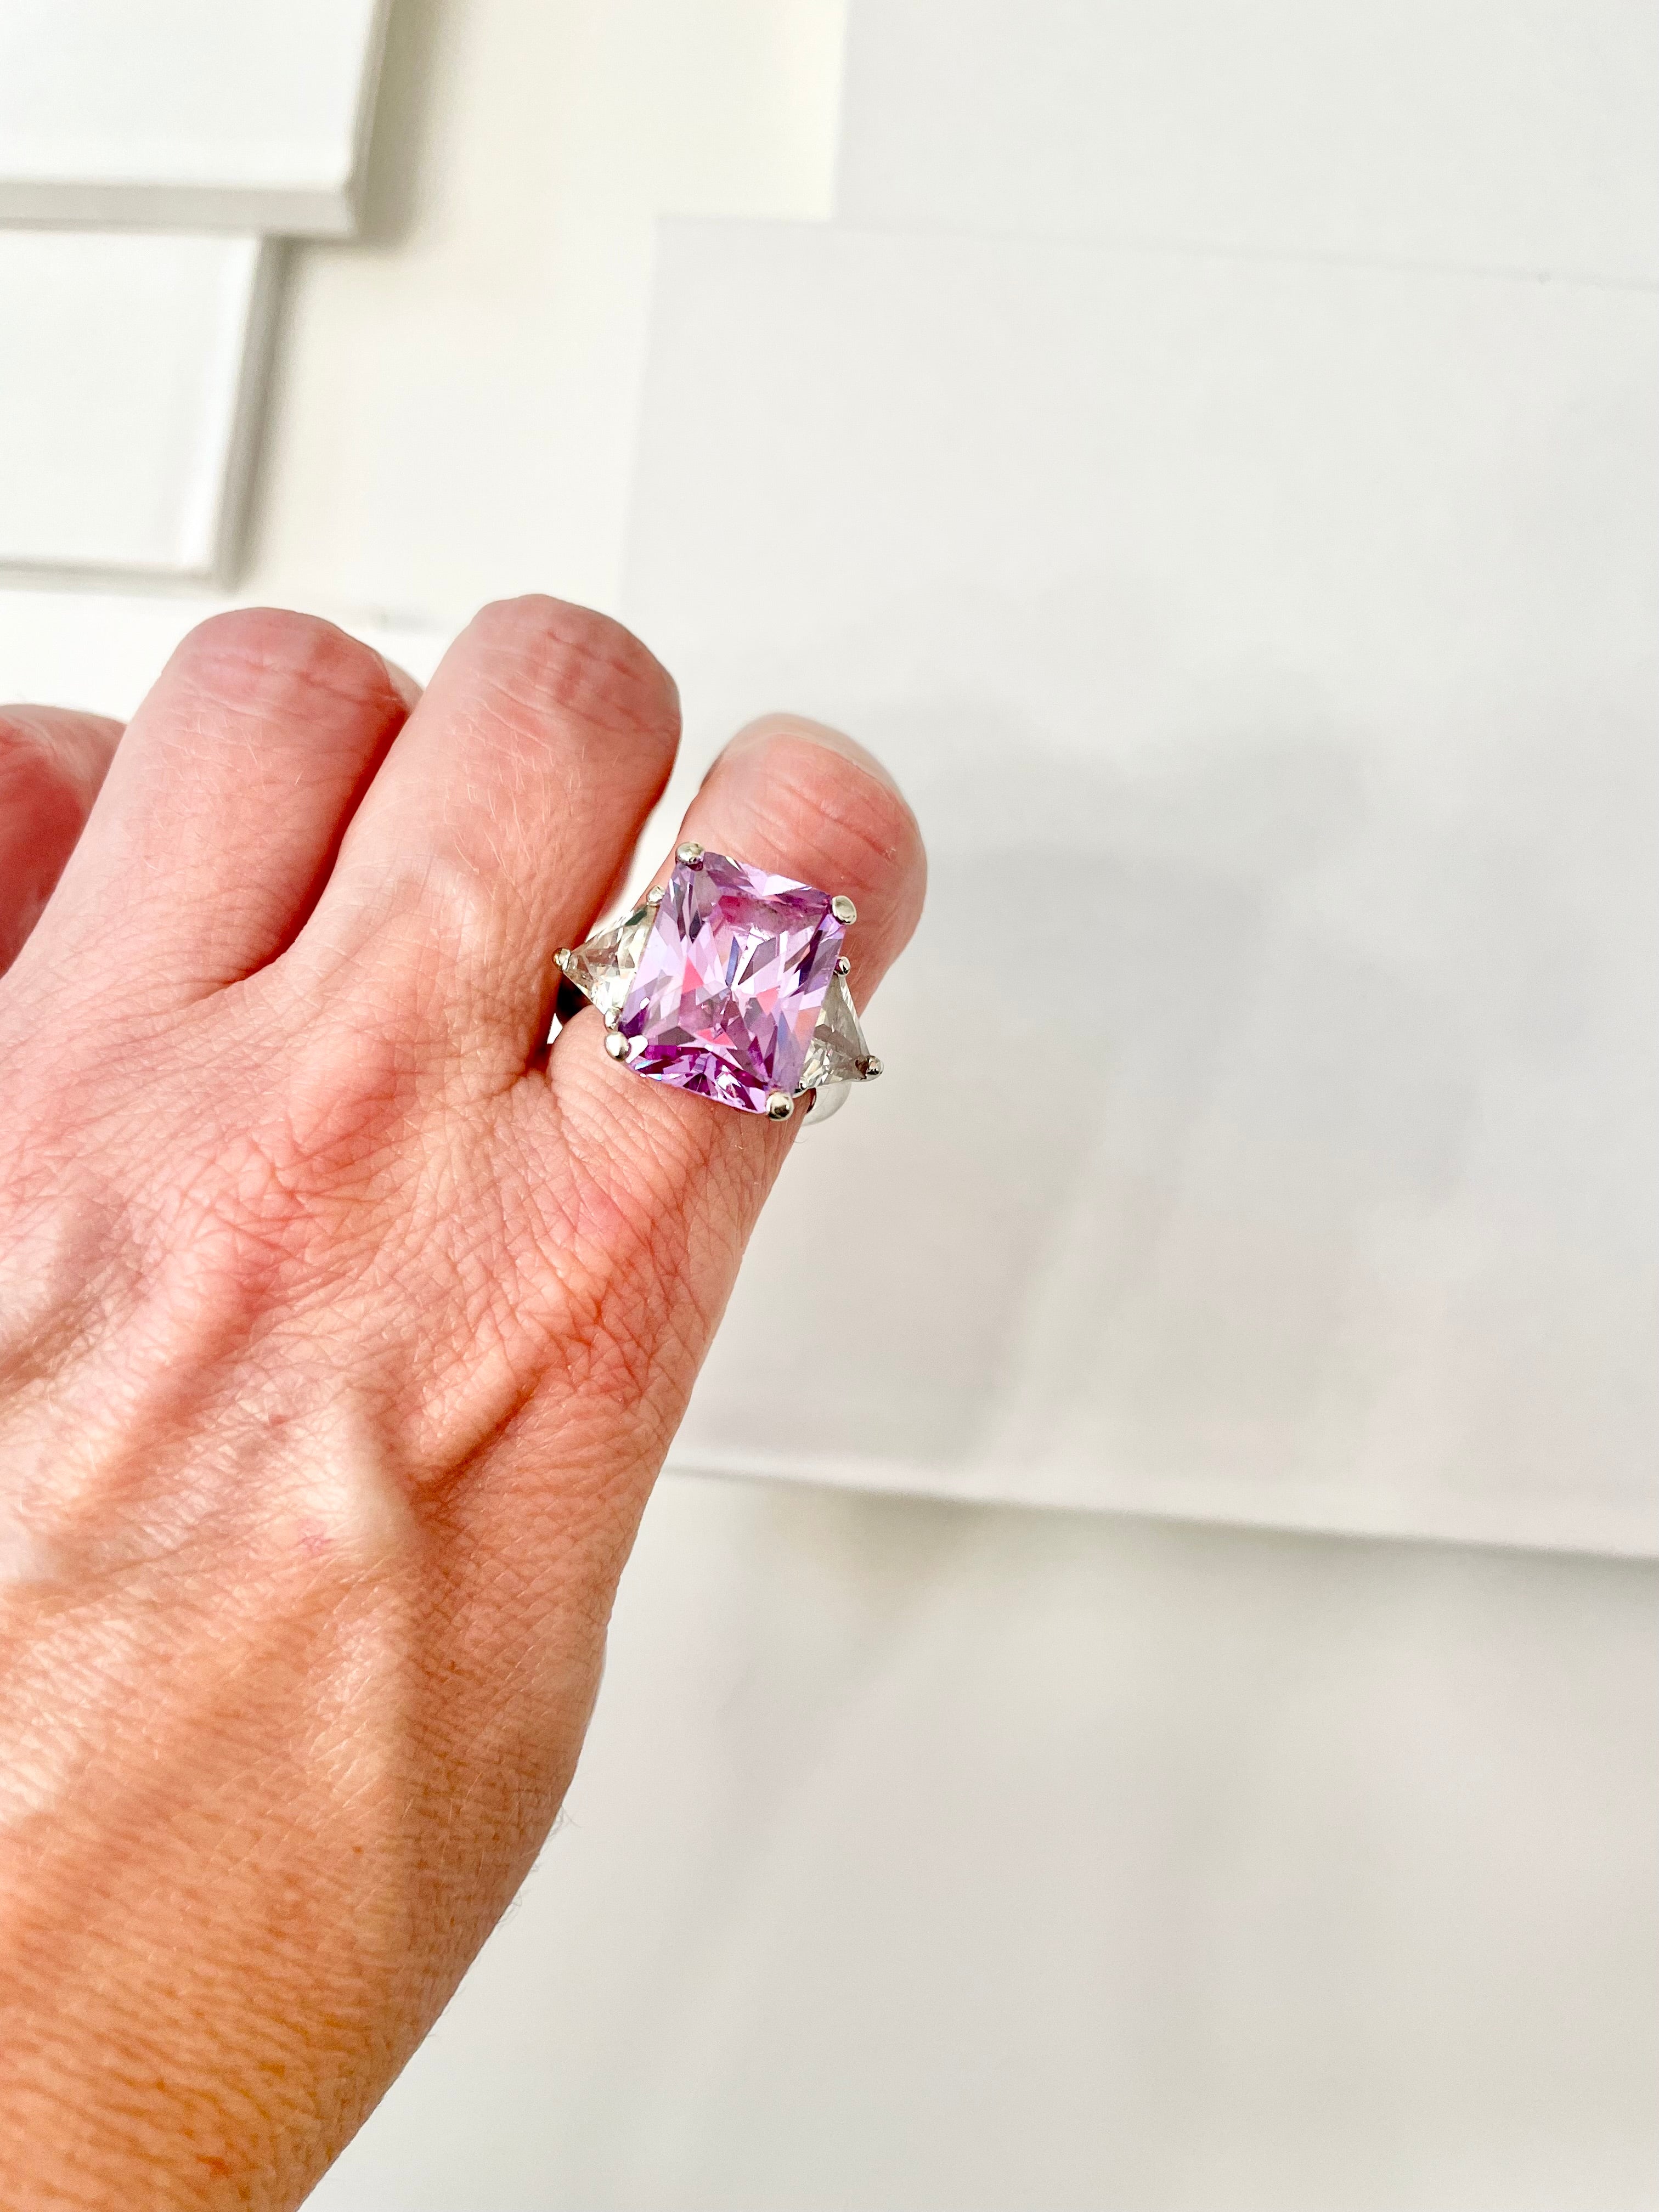 The Socialite and her love of gems! This cocktail ring is absolutely stunning!...